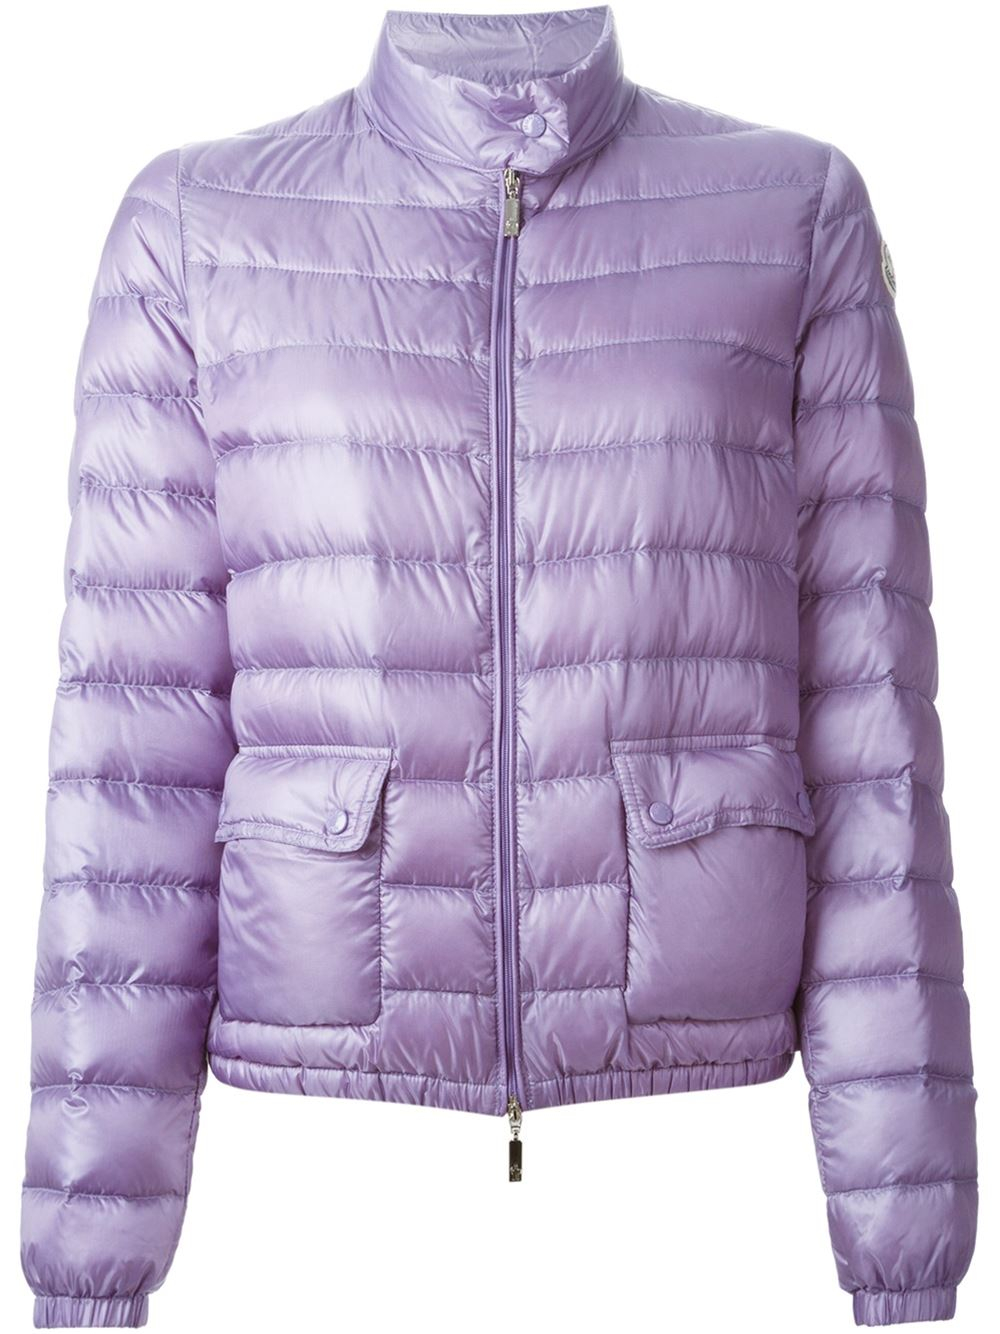 Moncler Lans Quilted Jacket in Pink & Purple (Purple) - Lyst